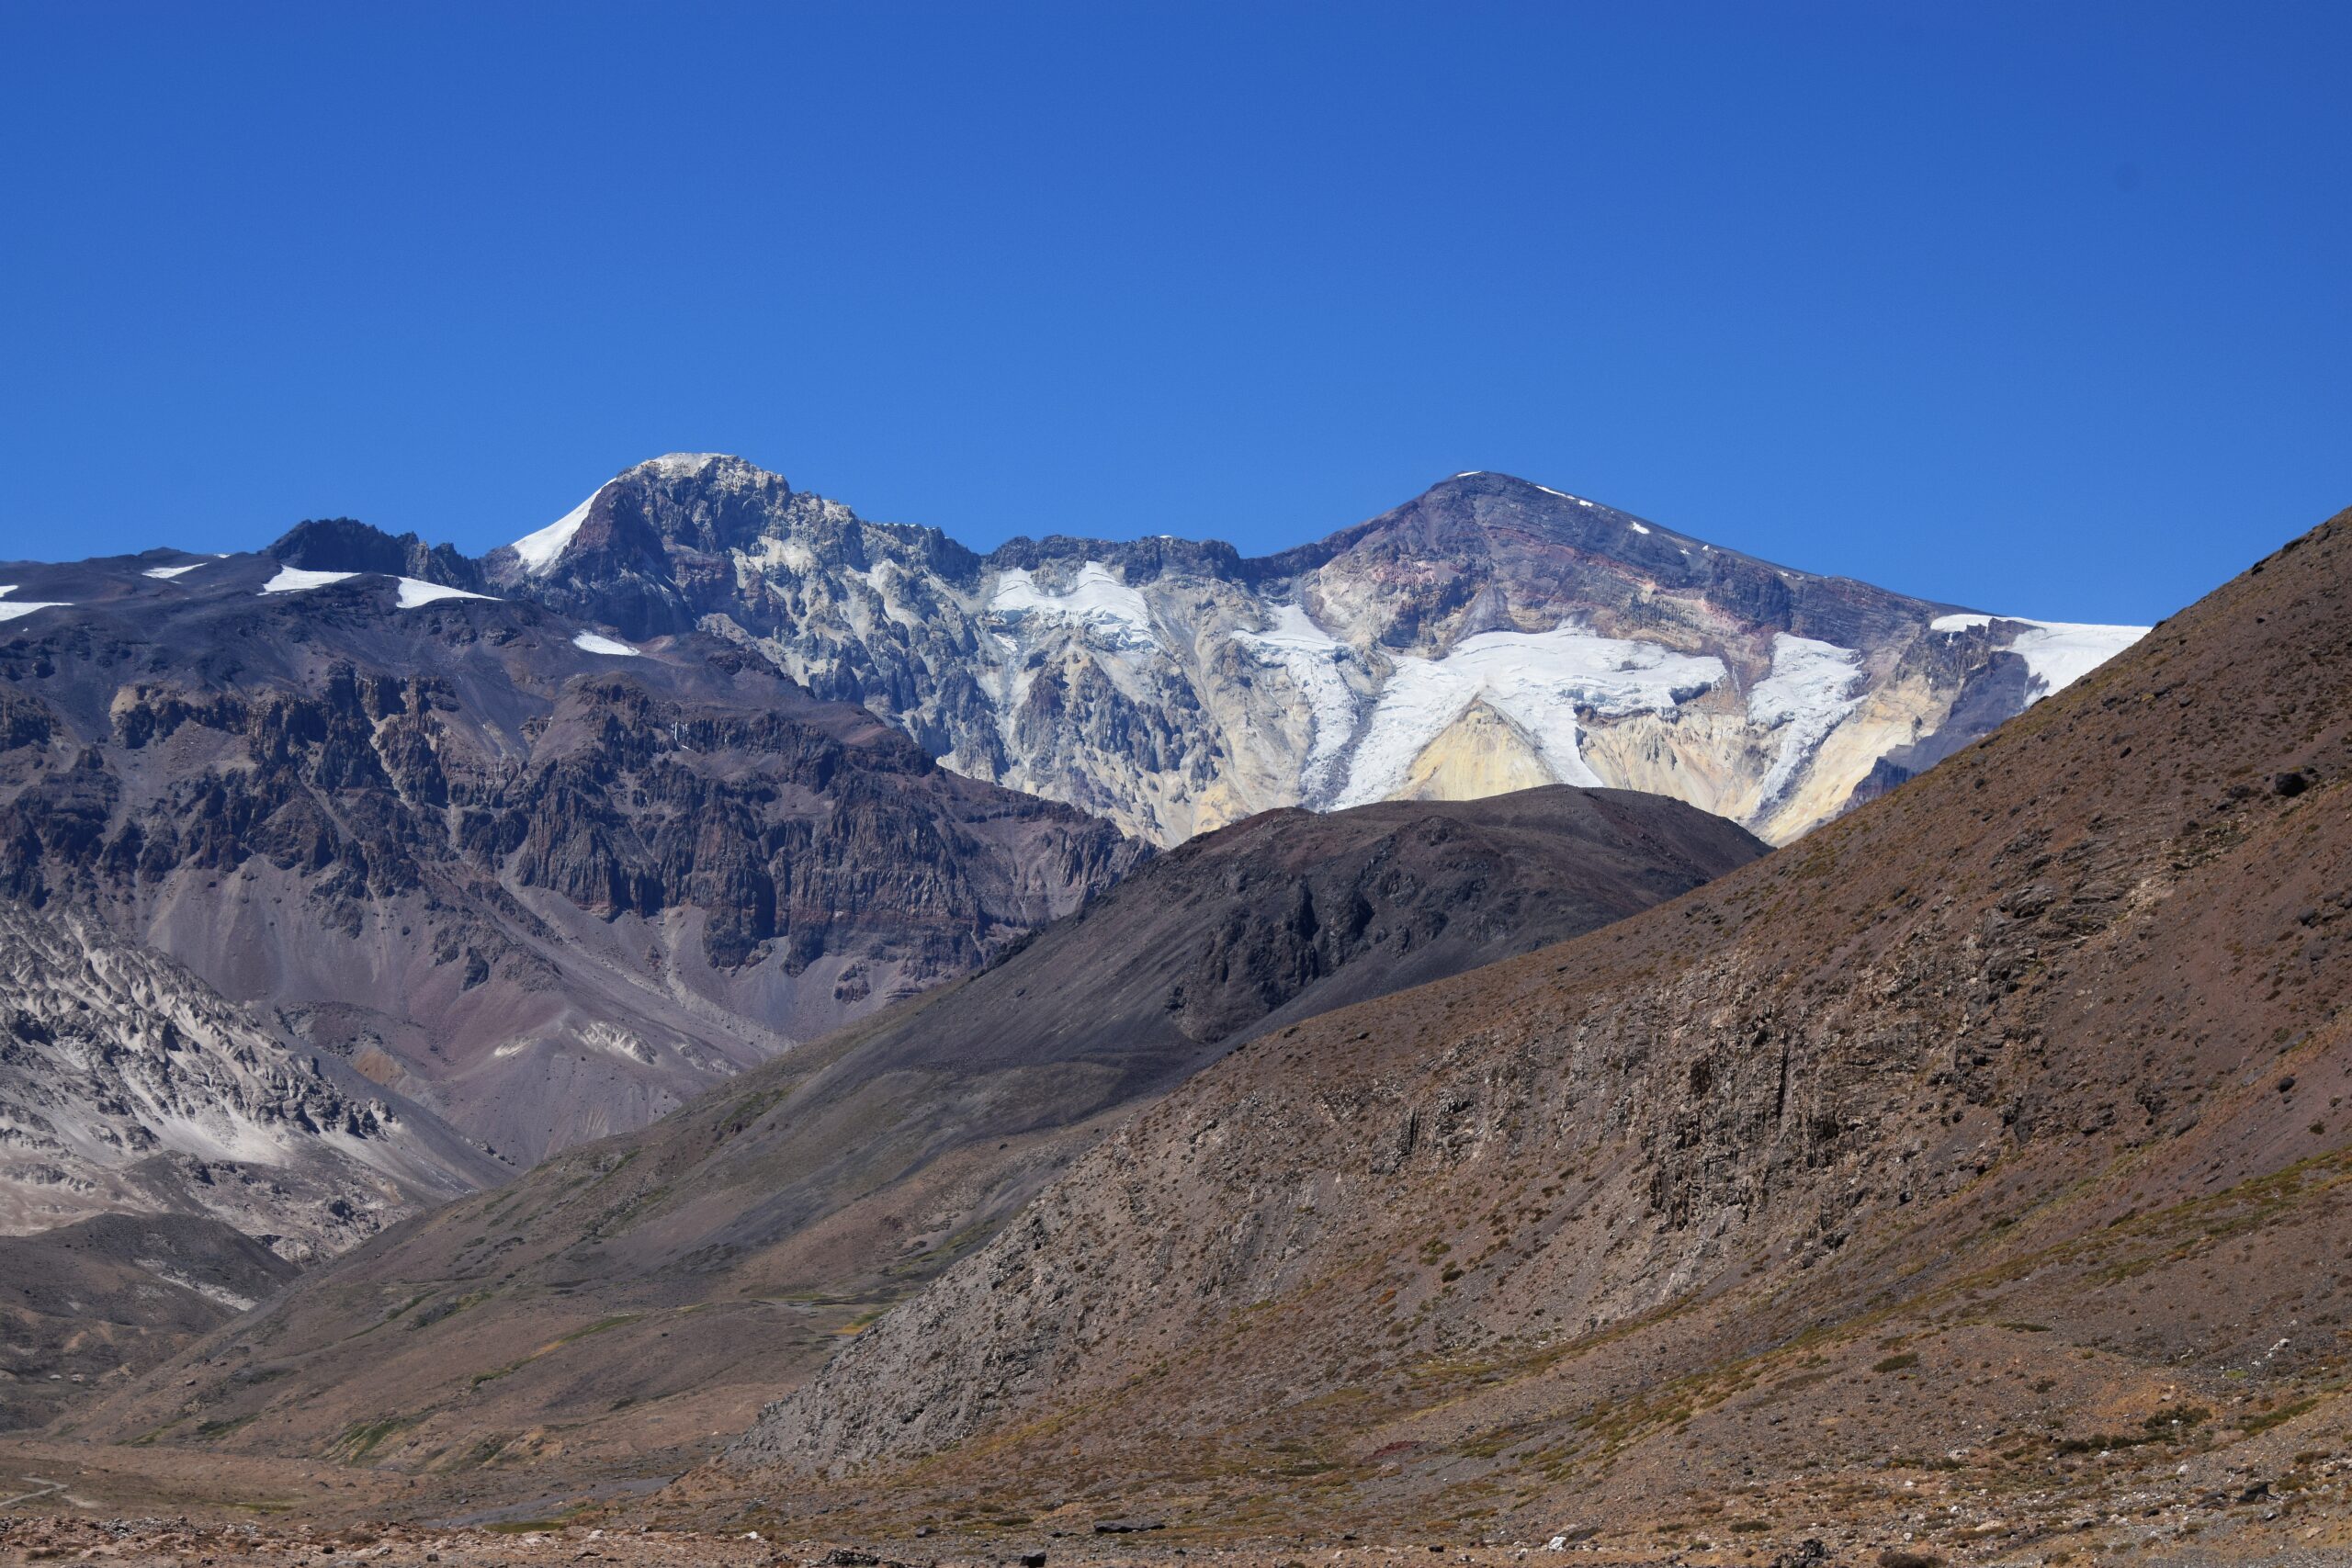 Three Argentine climbers found dead in the Andes